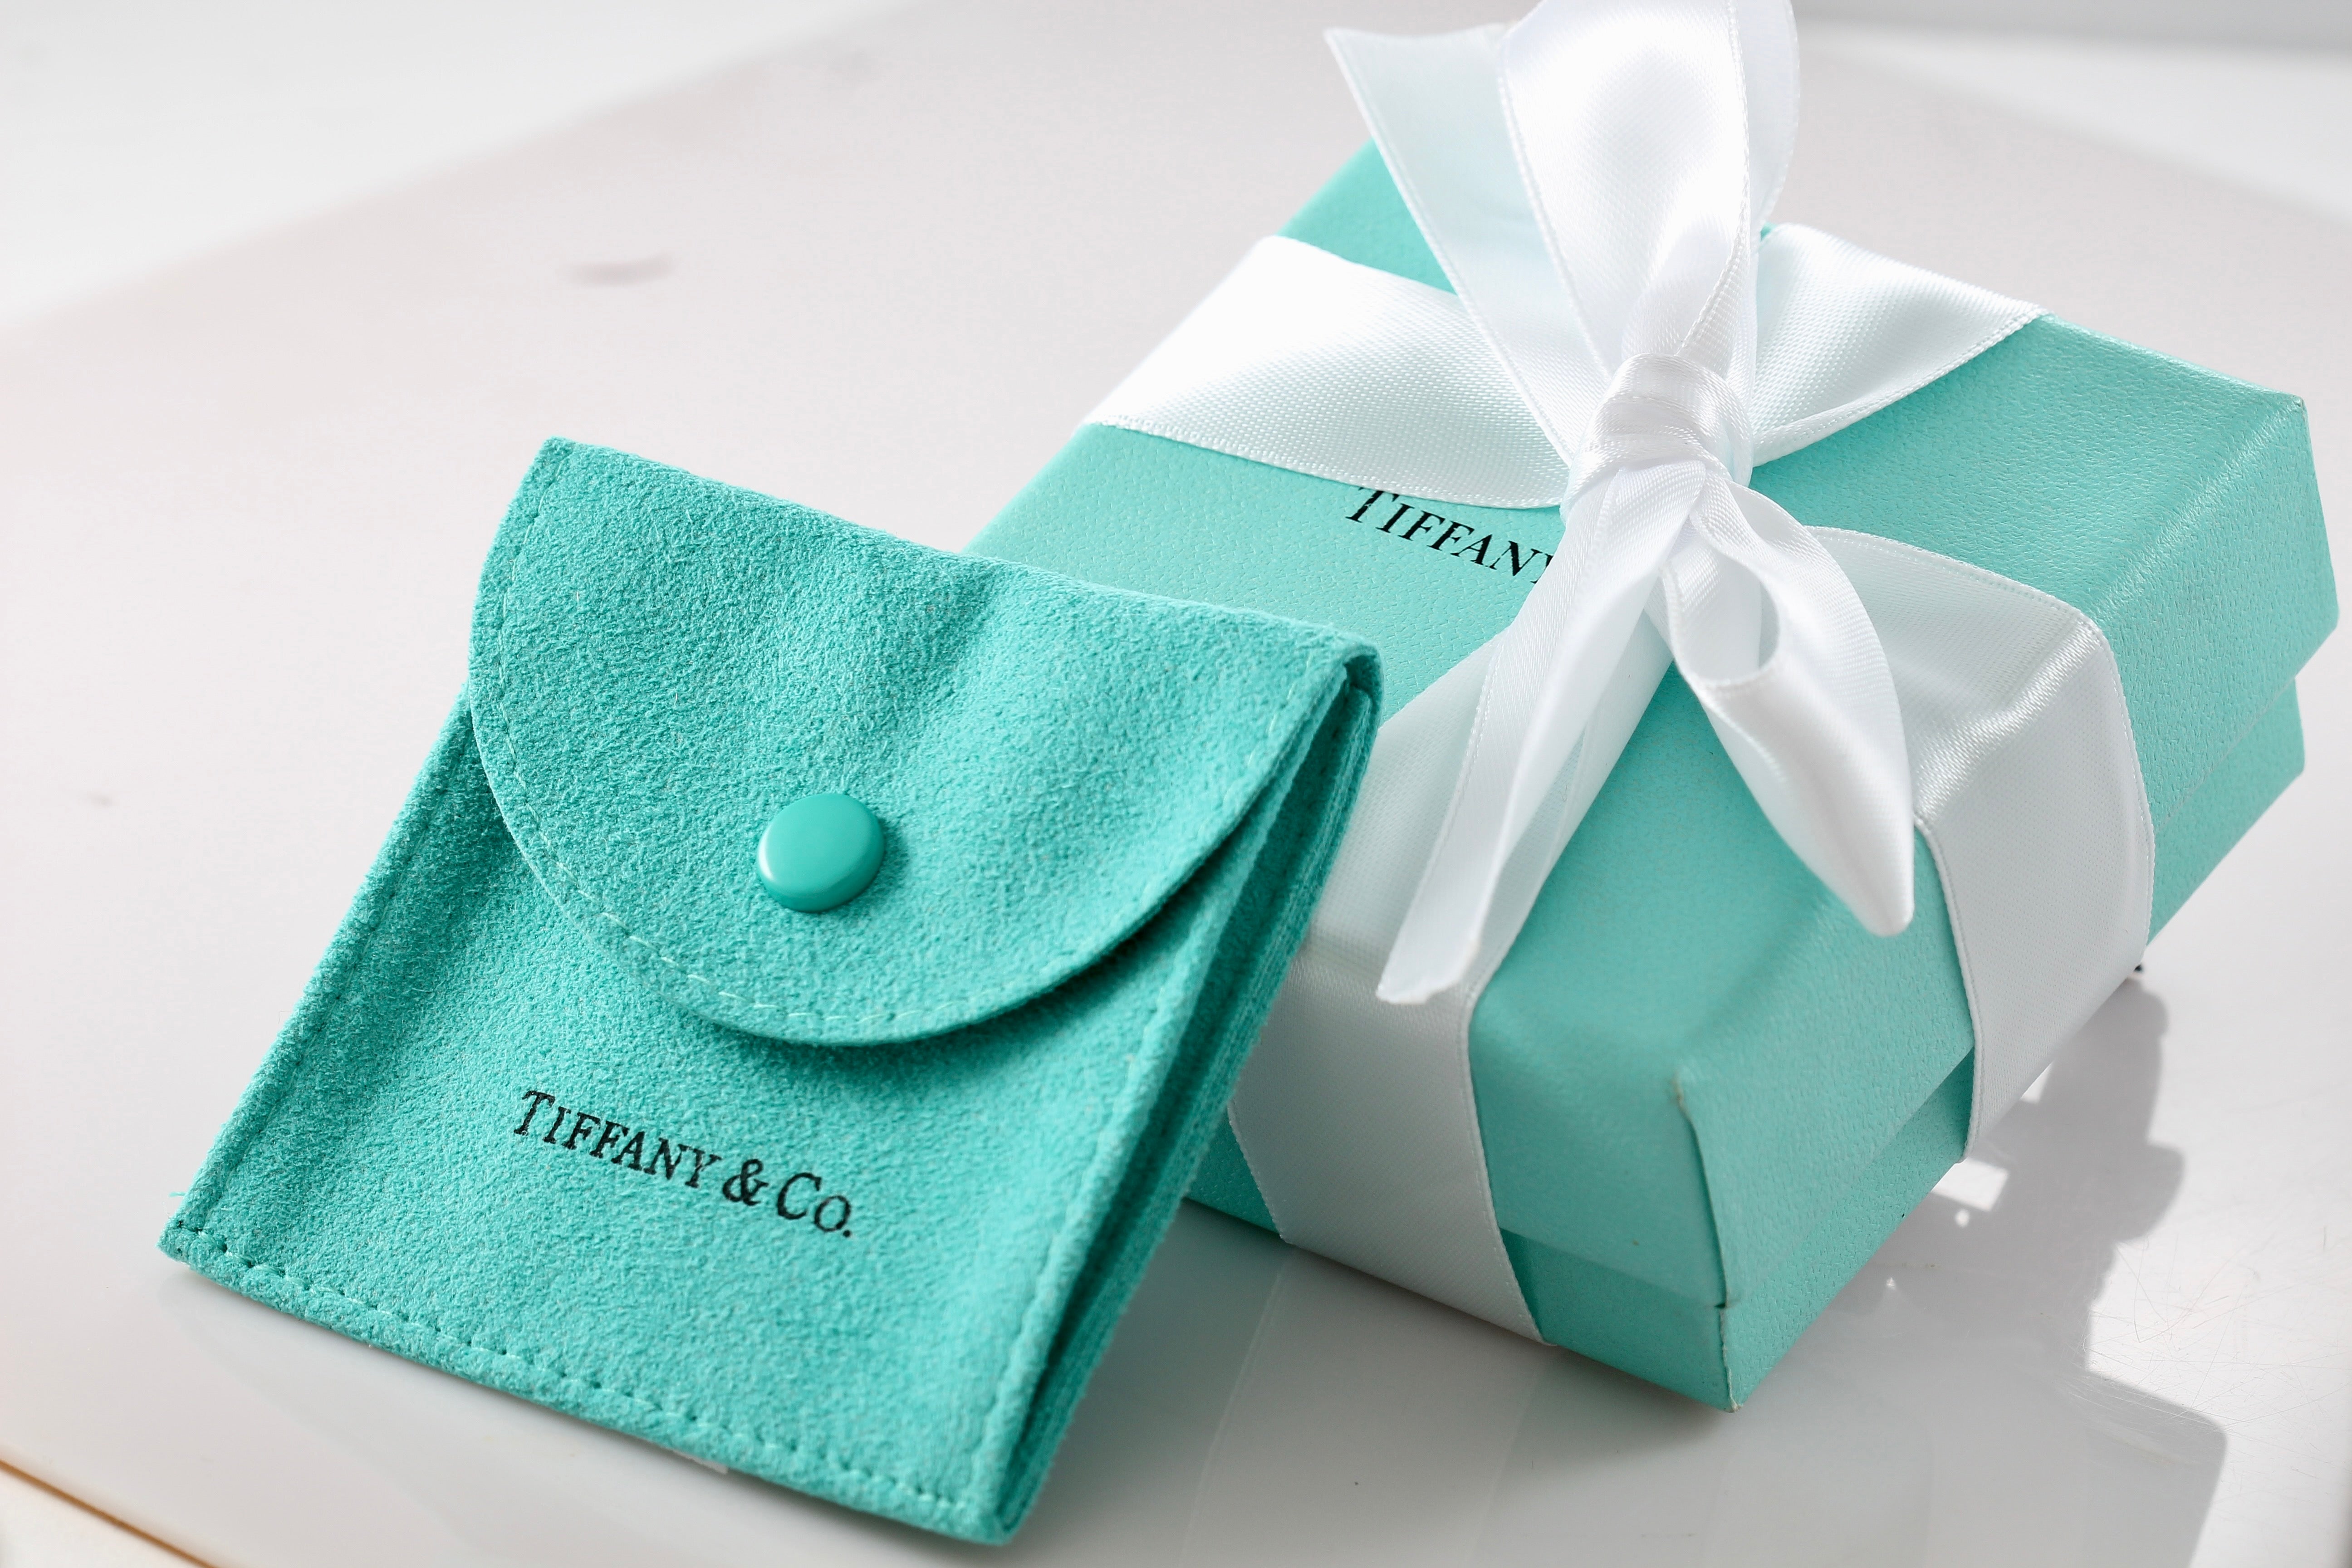 Tiffany & Co. Square Box & Button Pouch Packaging